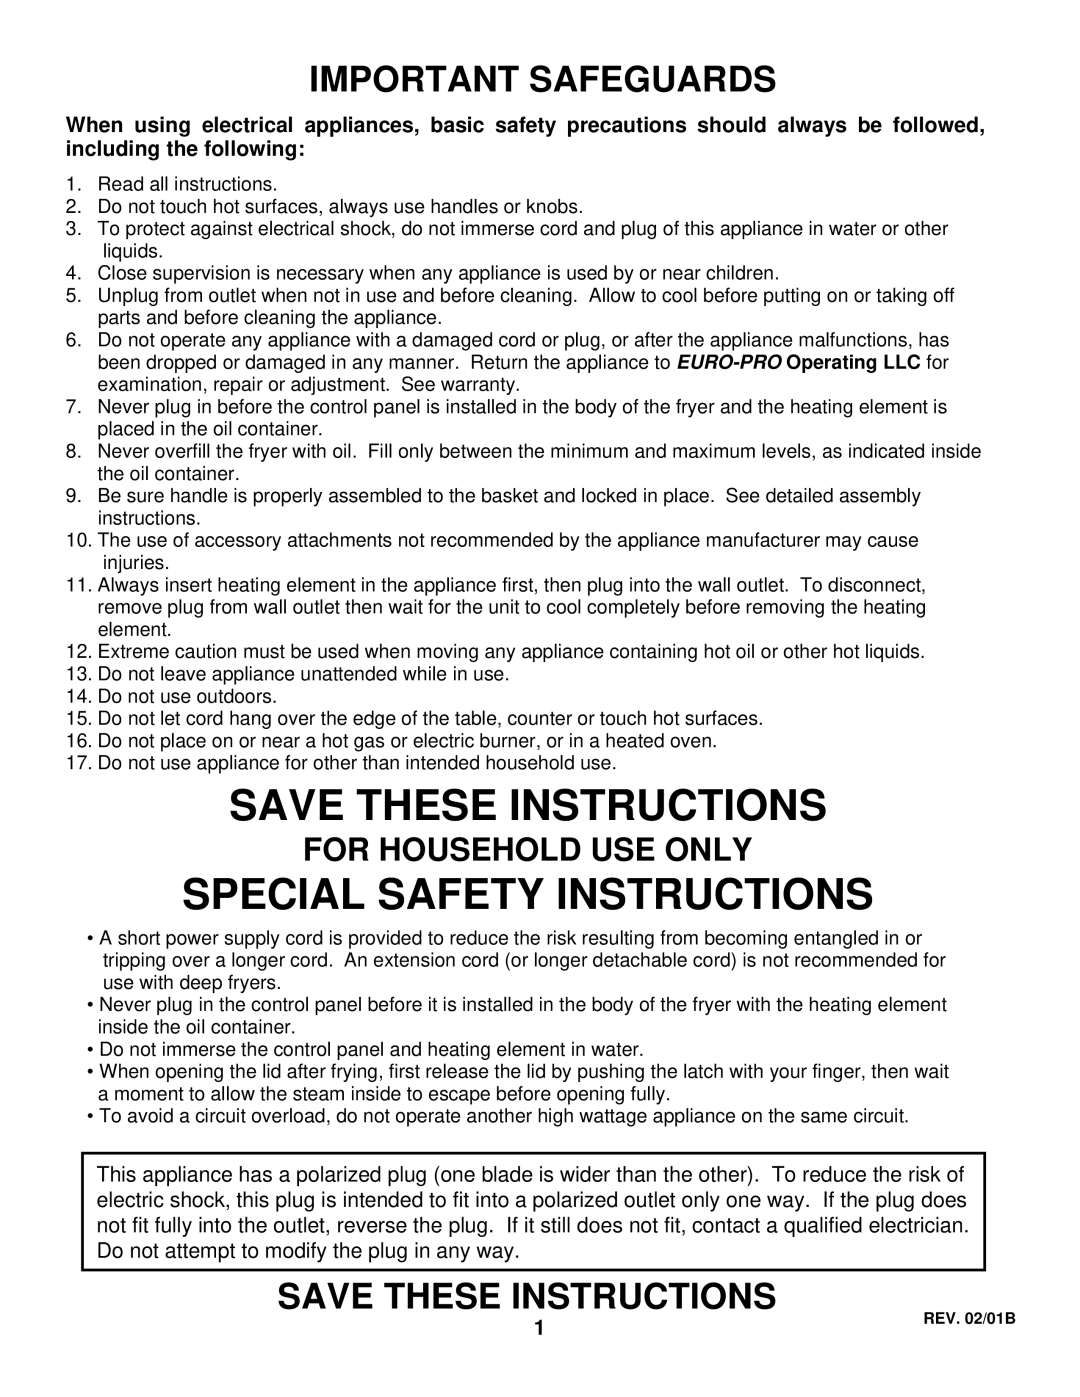 Bravetti EP67 manual Save These Instructions, Special Safety Instructions, For Household Use Only, Important Safeguards 